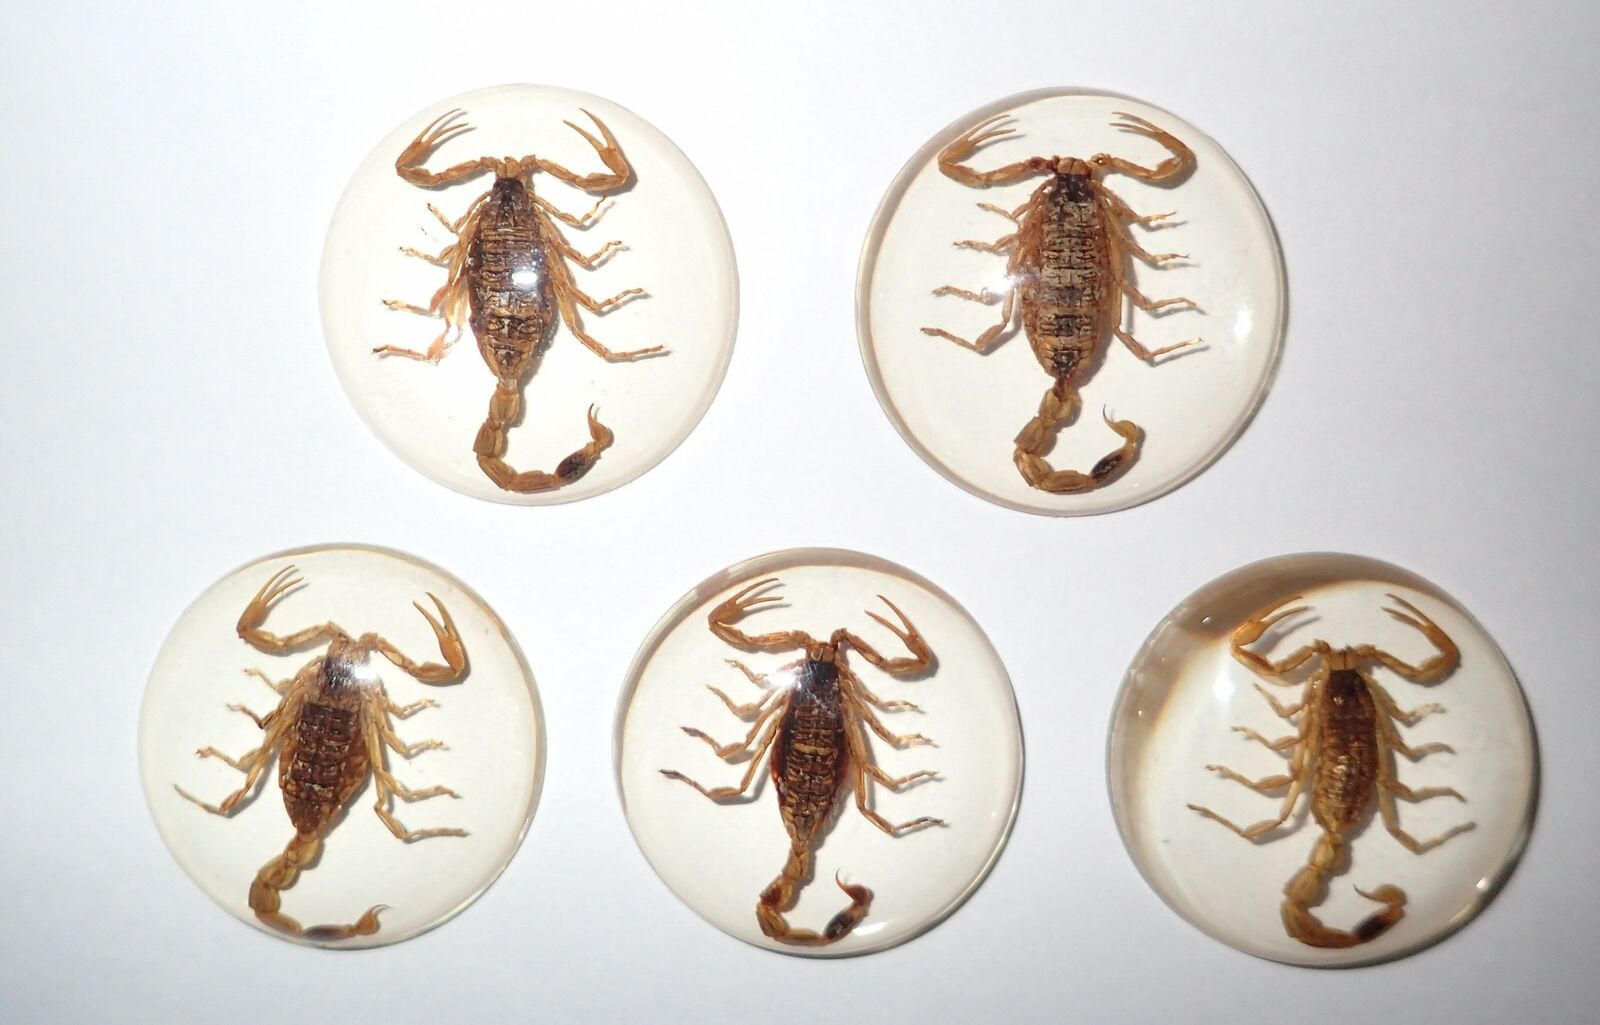 Insect Cabochon Golden Scorpion Specimen Round 35 mm Clear 10 pieces Lot